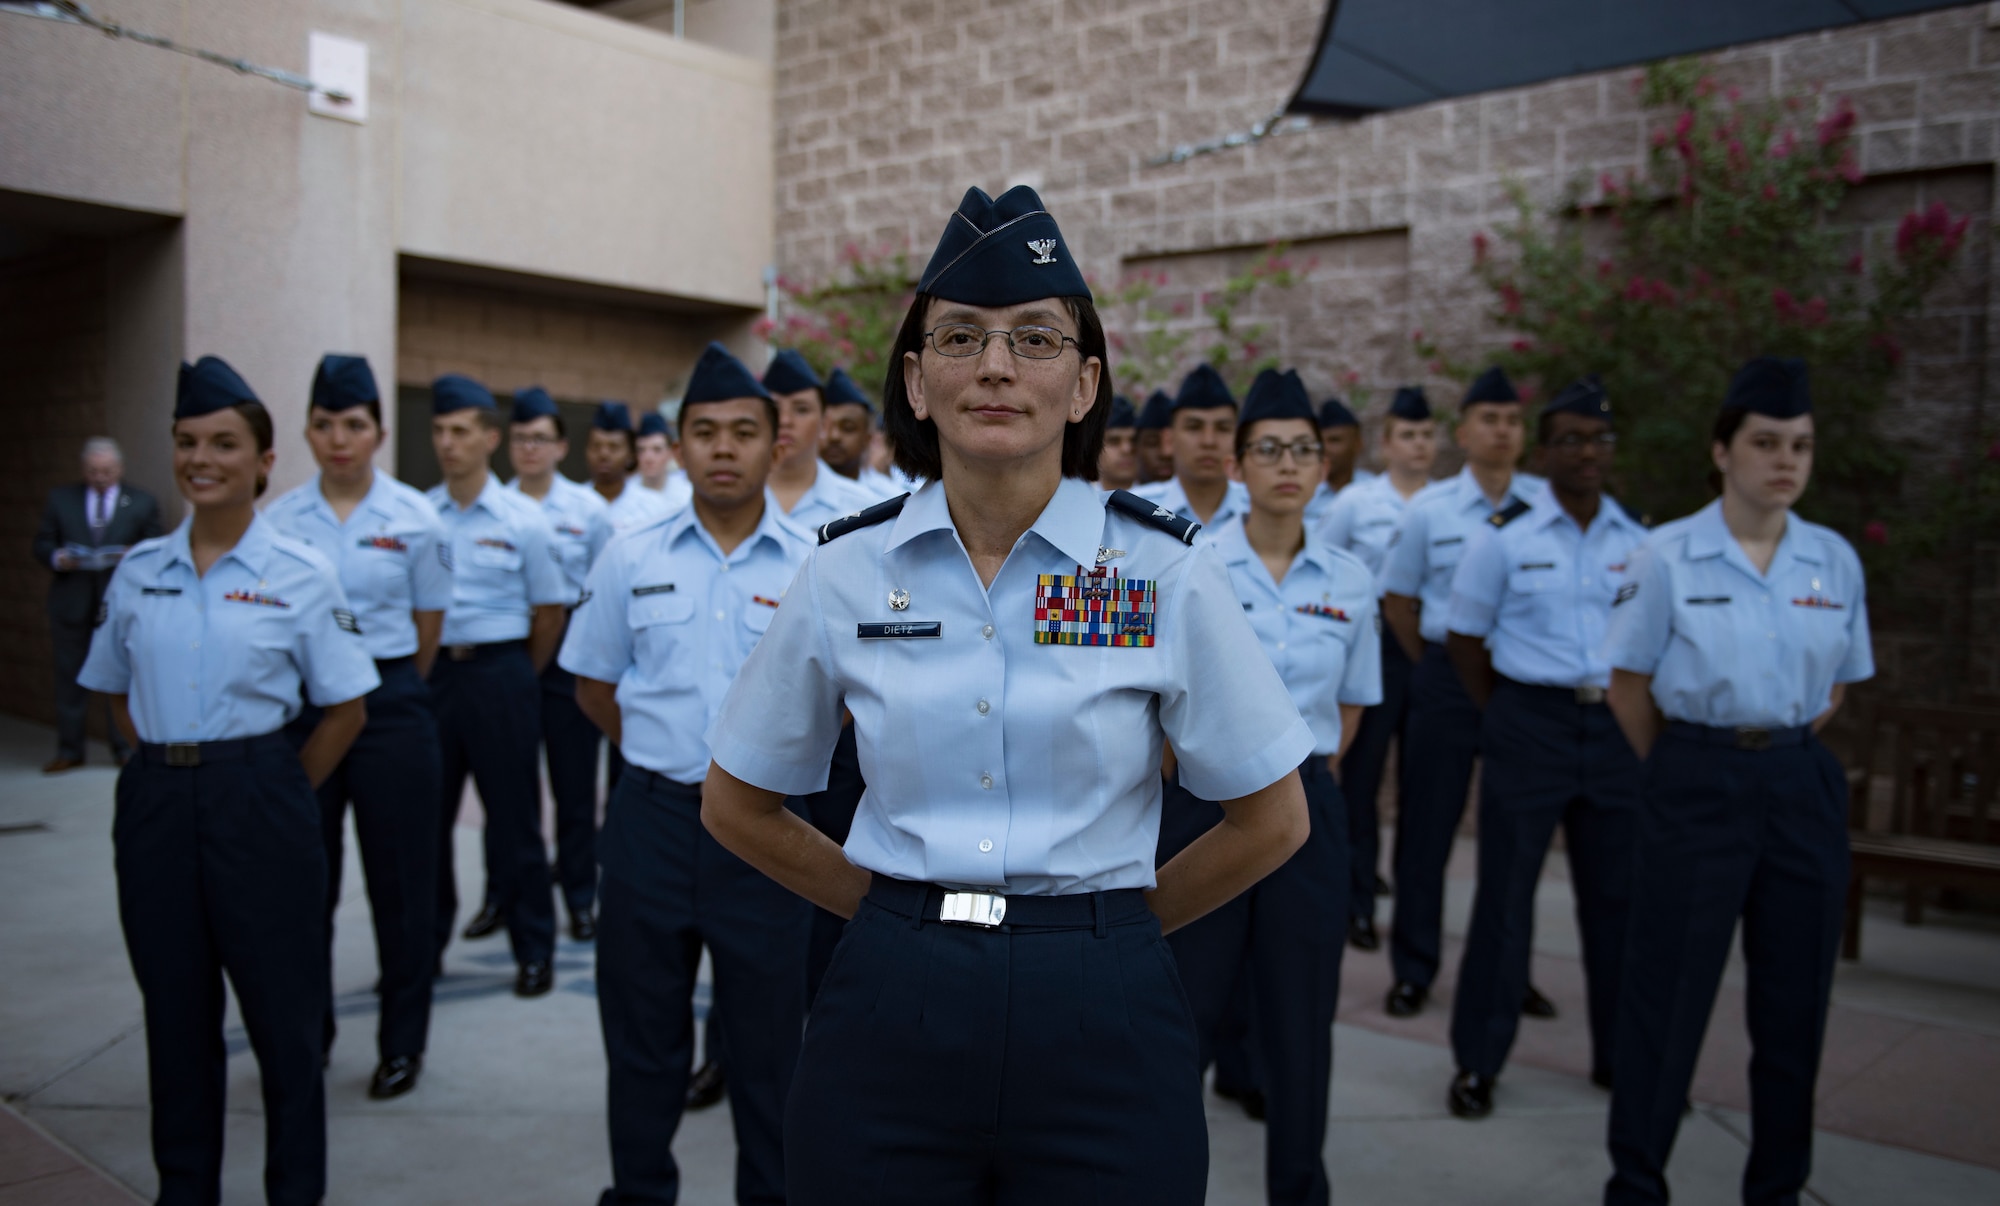 Col. Suzie Dietz, 99th Inpatient Operations Squadron commander, stands in front of a flight of Airmen during a change of command ceremony at Nellis Air Force Base, Nevada, June 29, 2018. The 99th IPTS is responsible for delivering safe care for Department of Defense patients. (U.S. Air Force photo by Airman 1st Class Andrew D. Sarver)